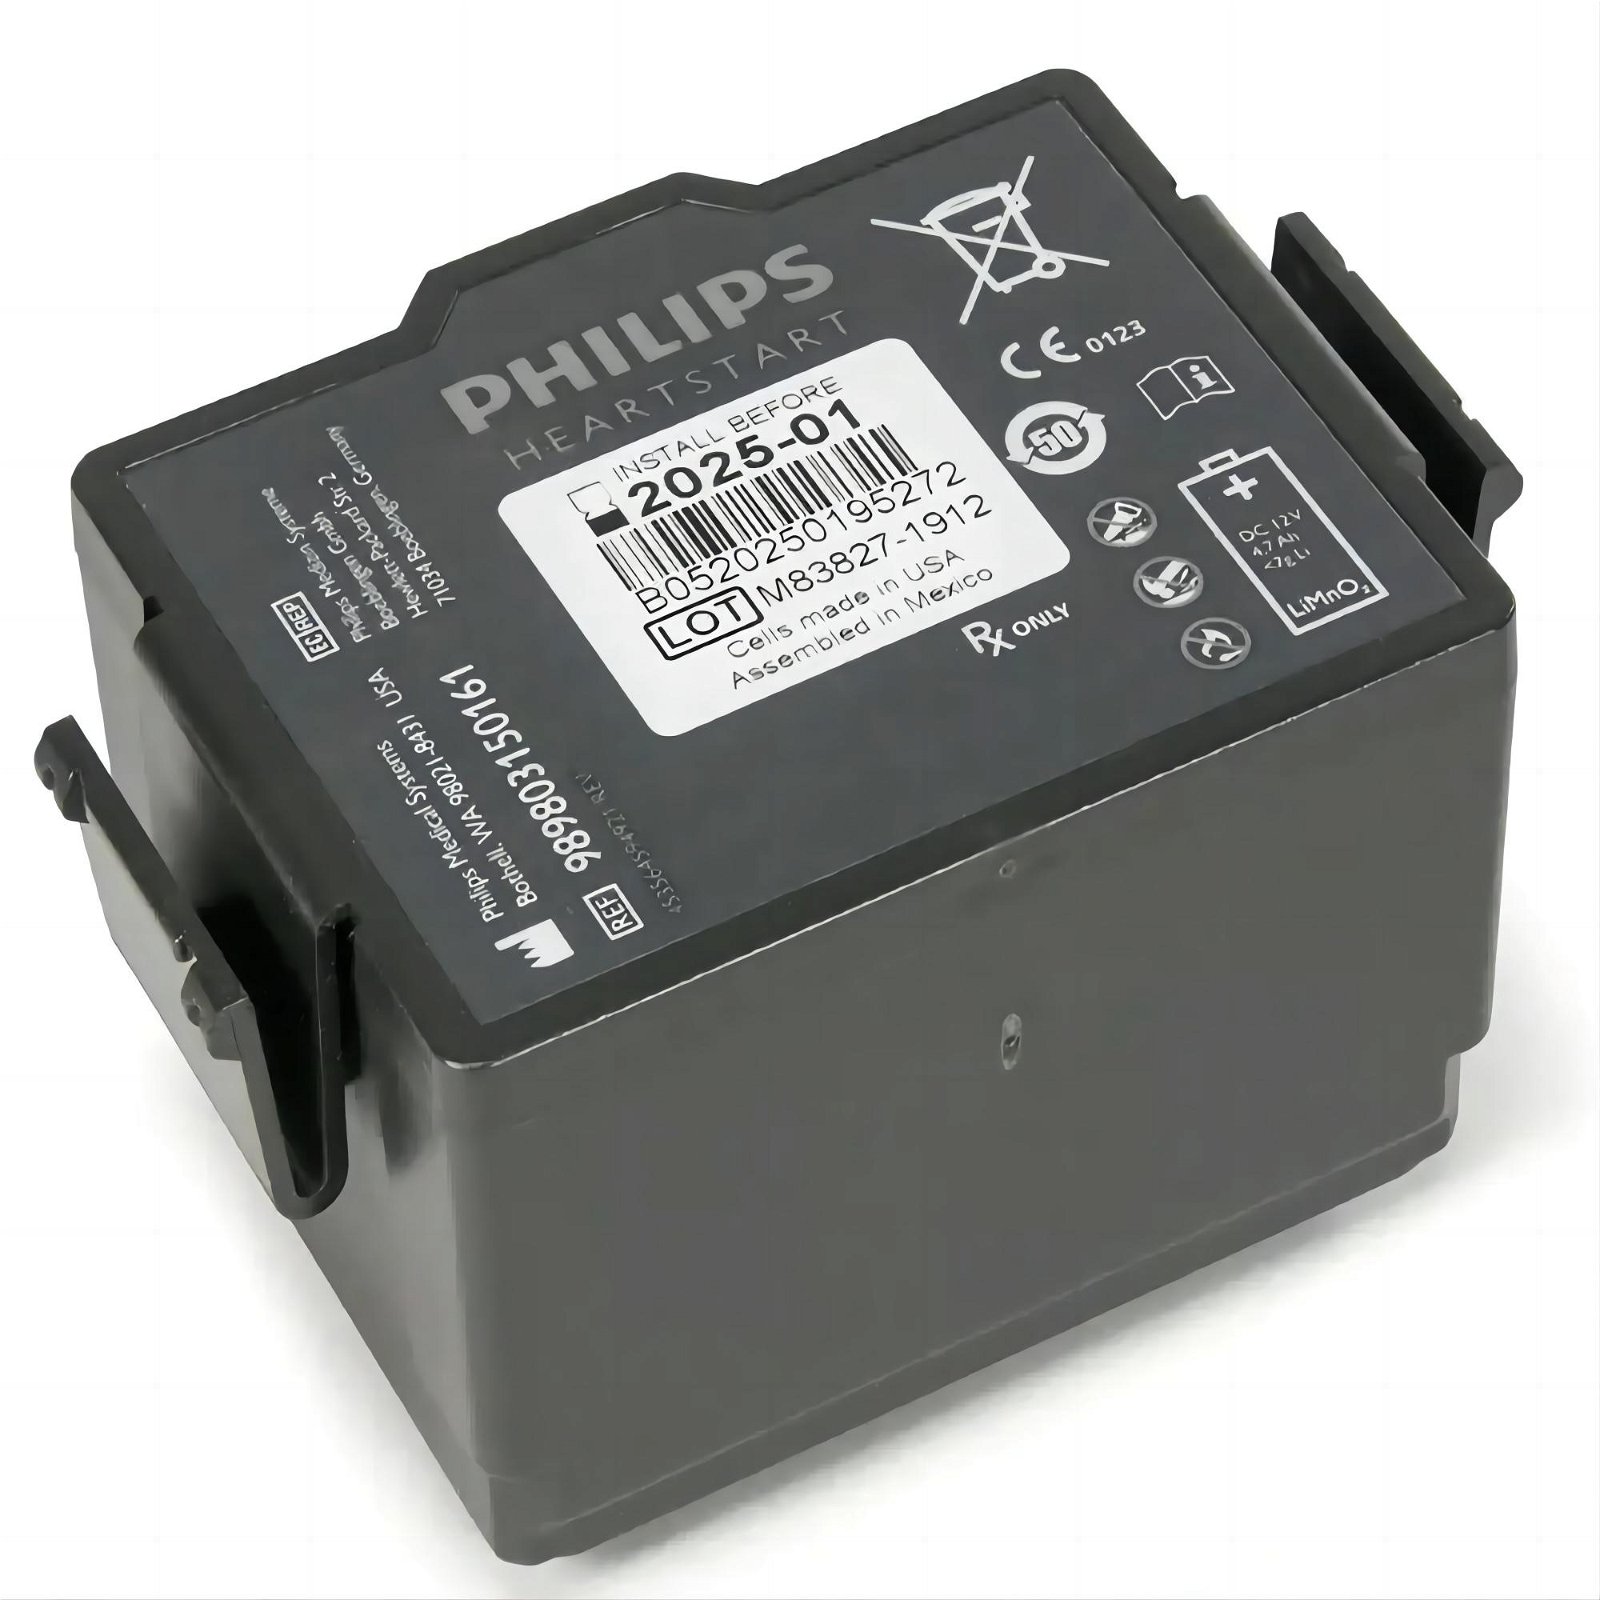 Original Philips defibrillation battery 989803150161 for monitor medical use